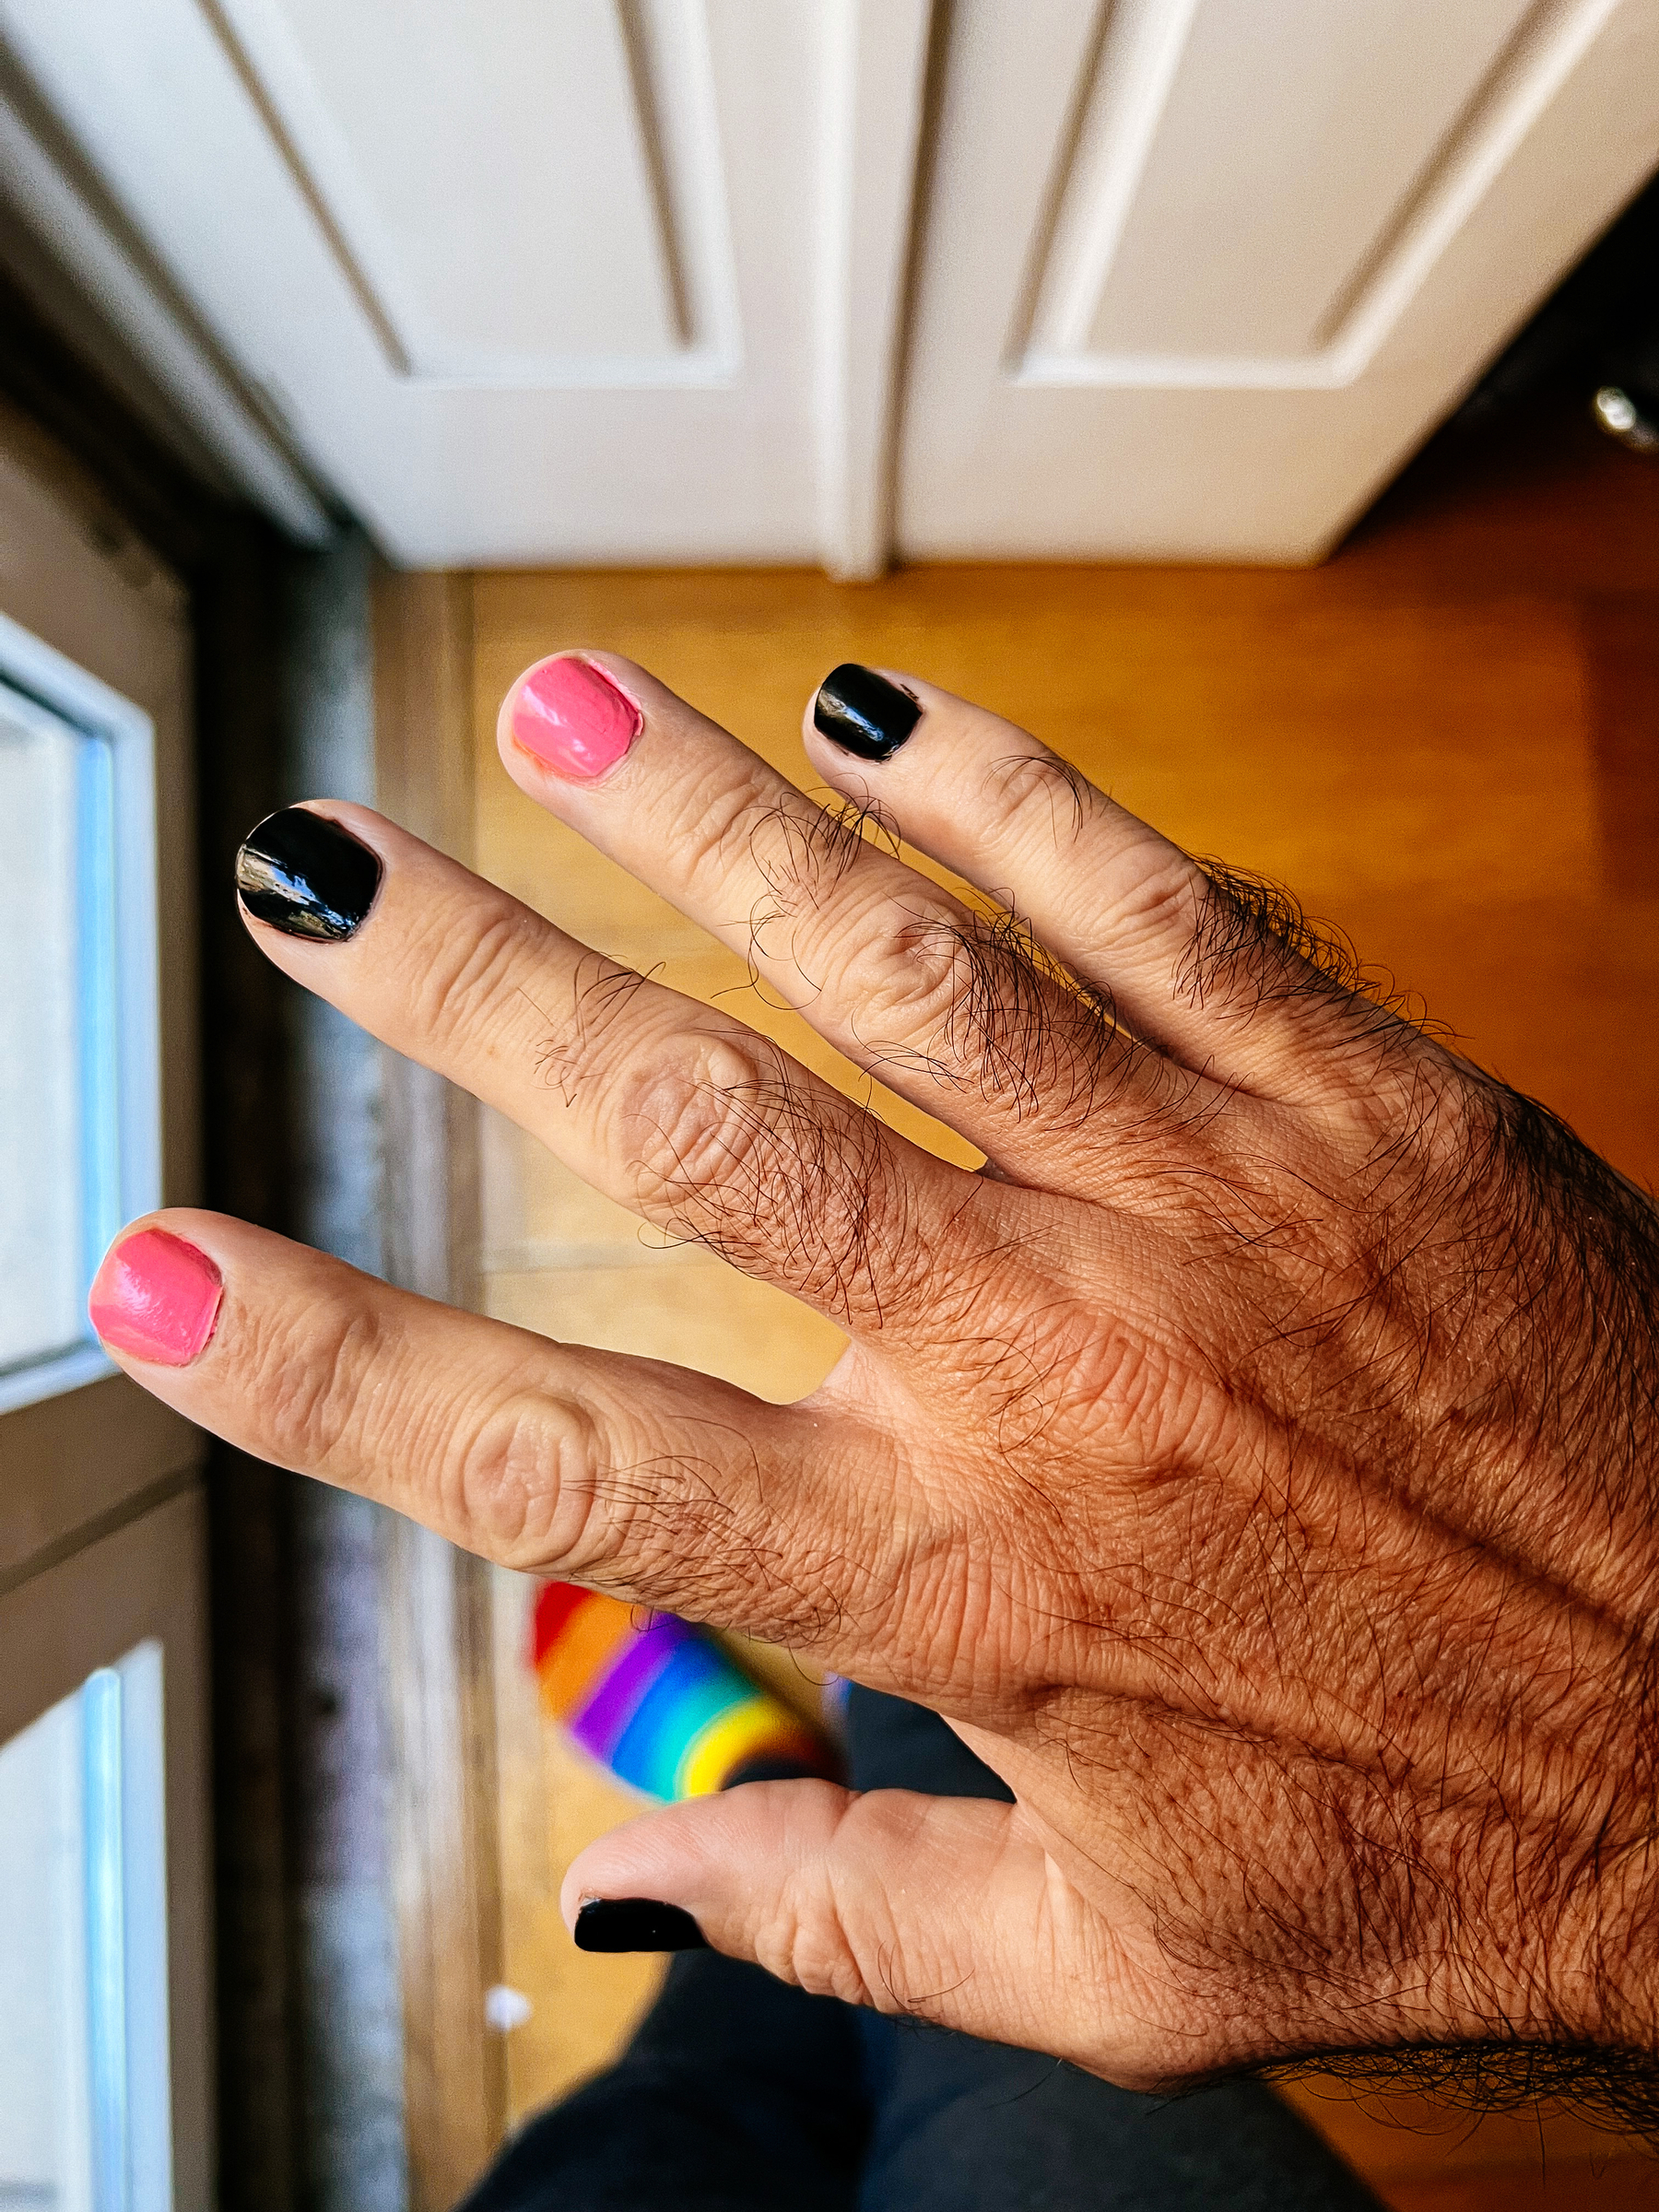 Looking down on a hand, nails painted in black and pink, on alternating fingers. 